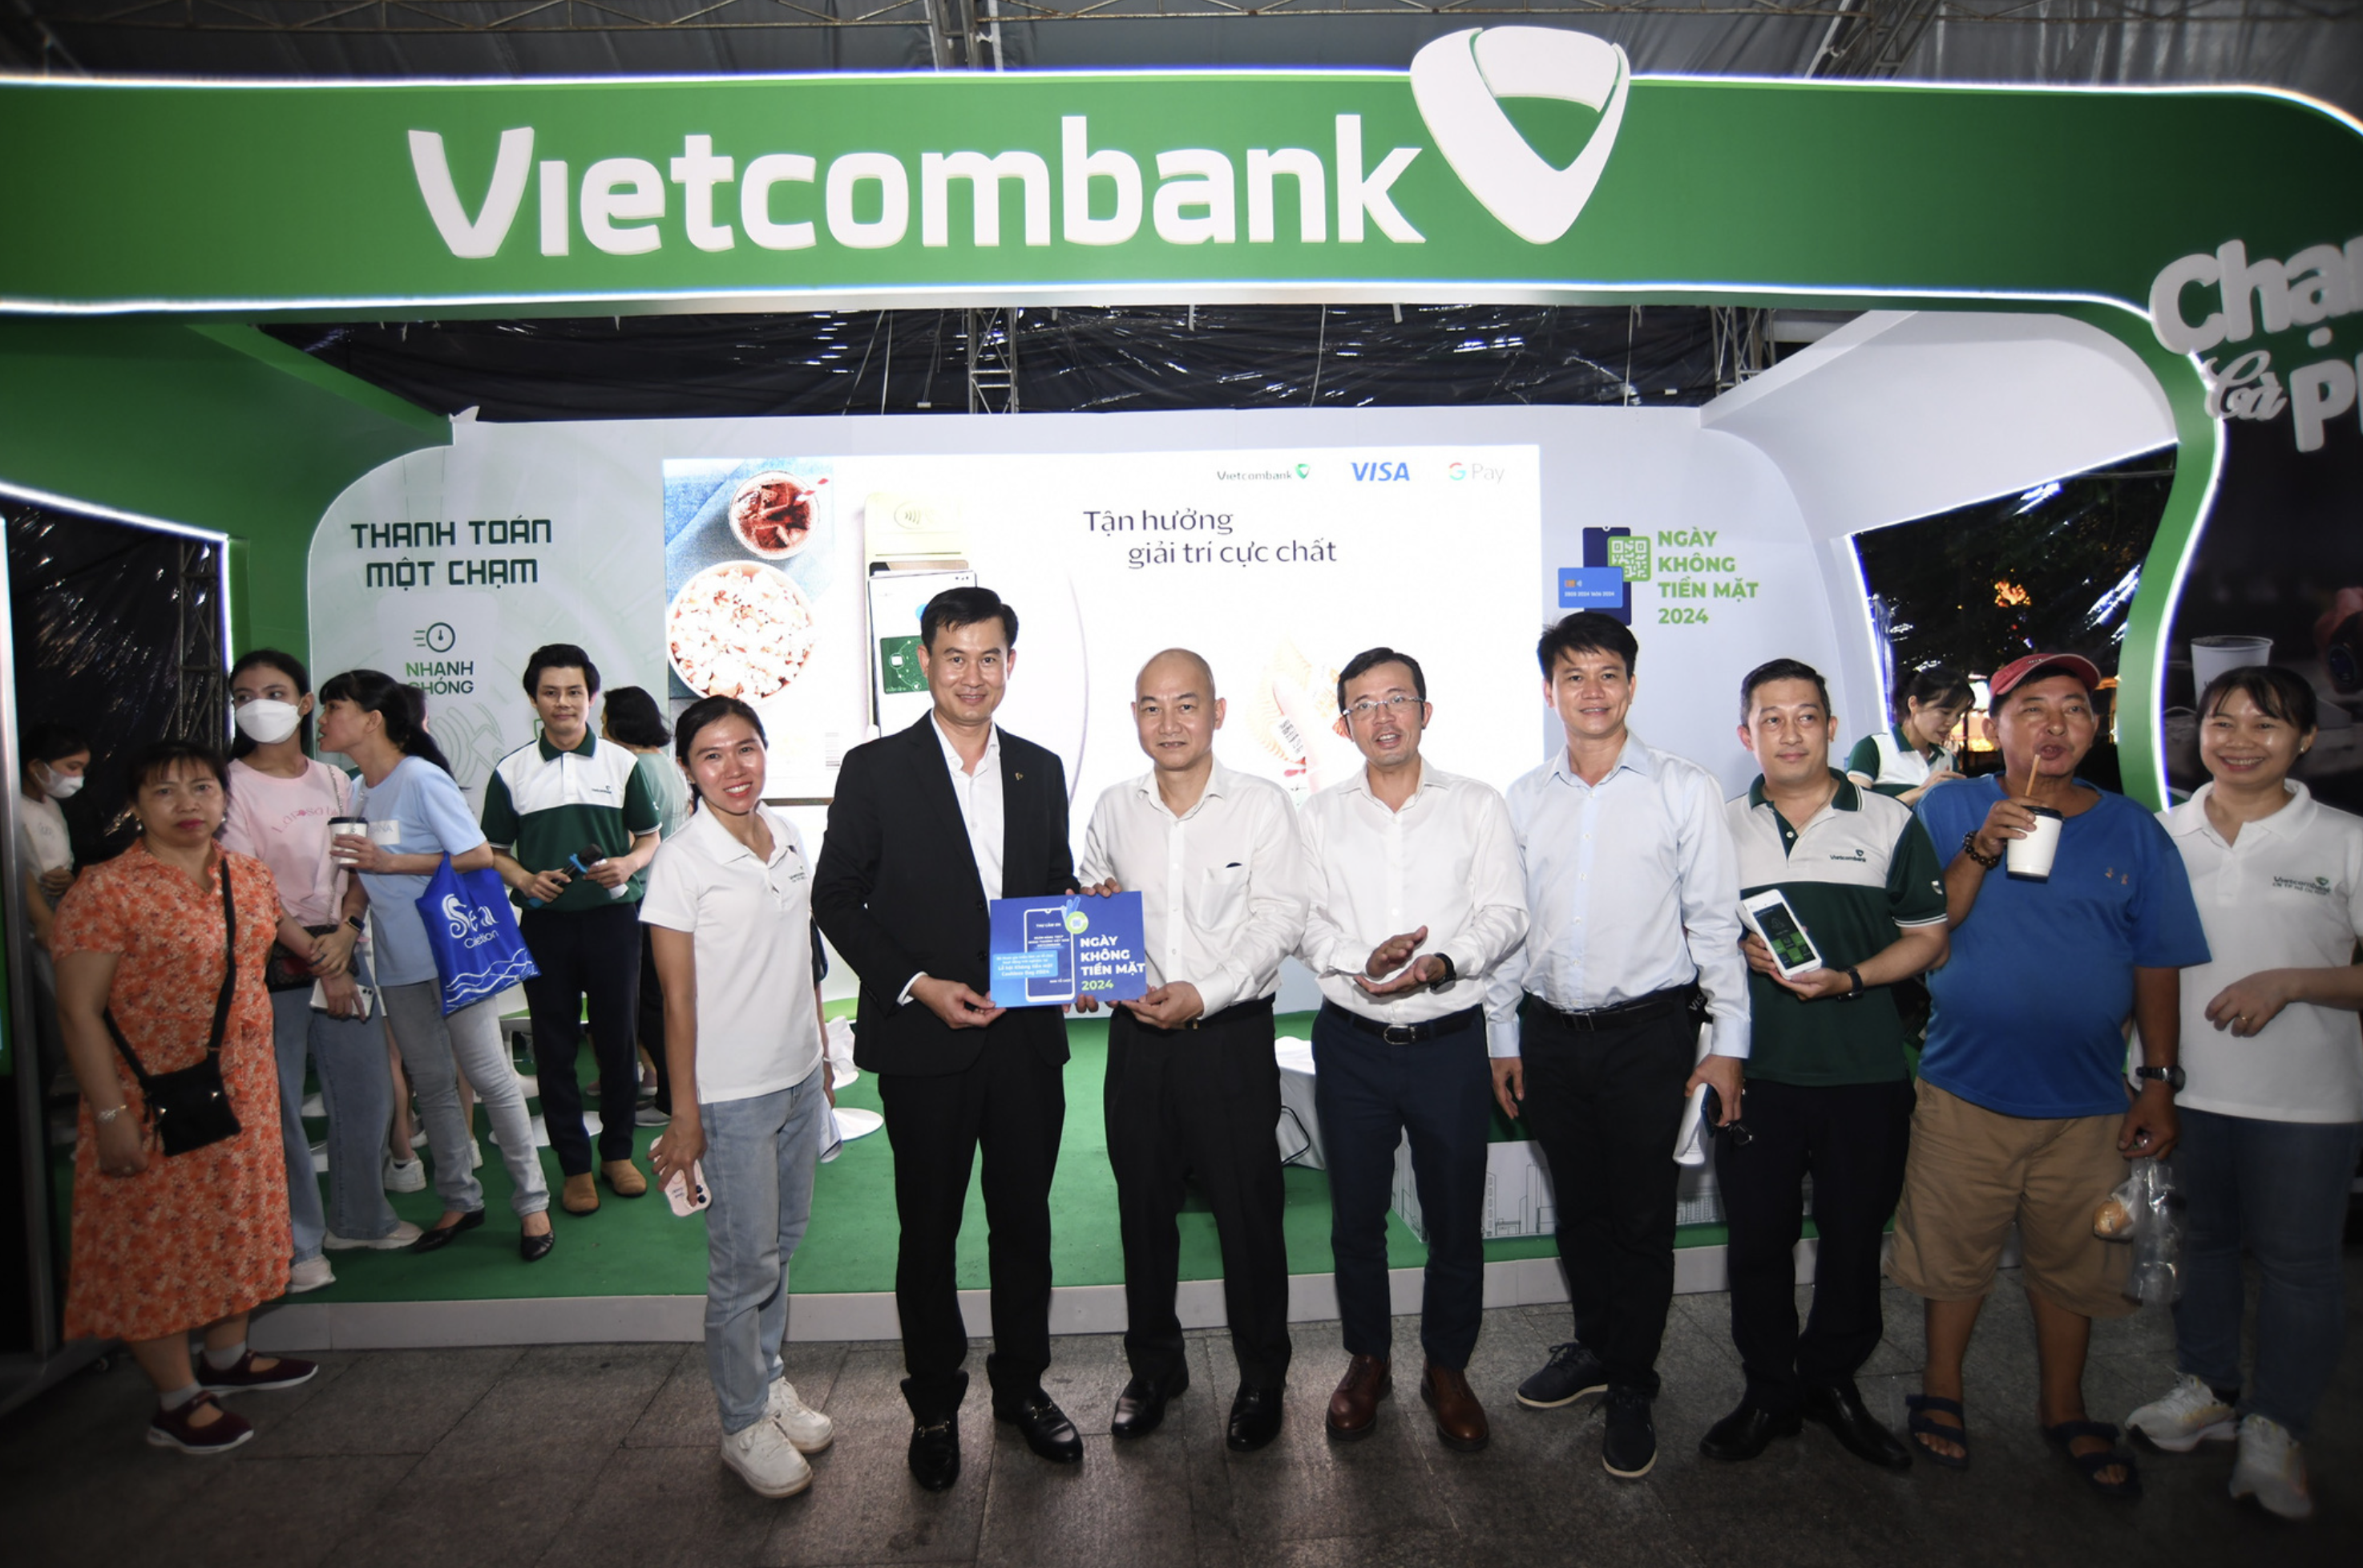 The organization board gives a thank-you letter to a representative of Vietcombank. Photo: Quang Dinh / Tuoi Tre